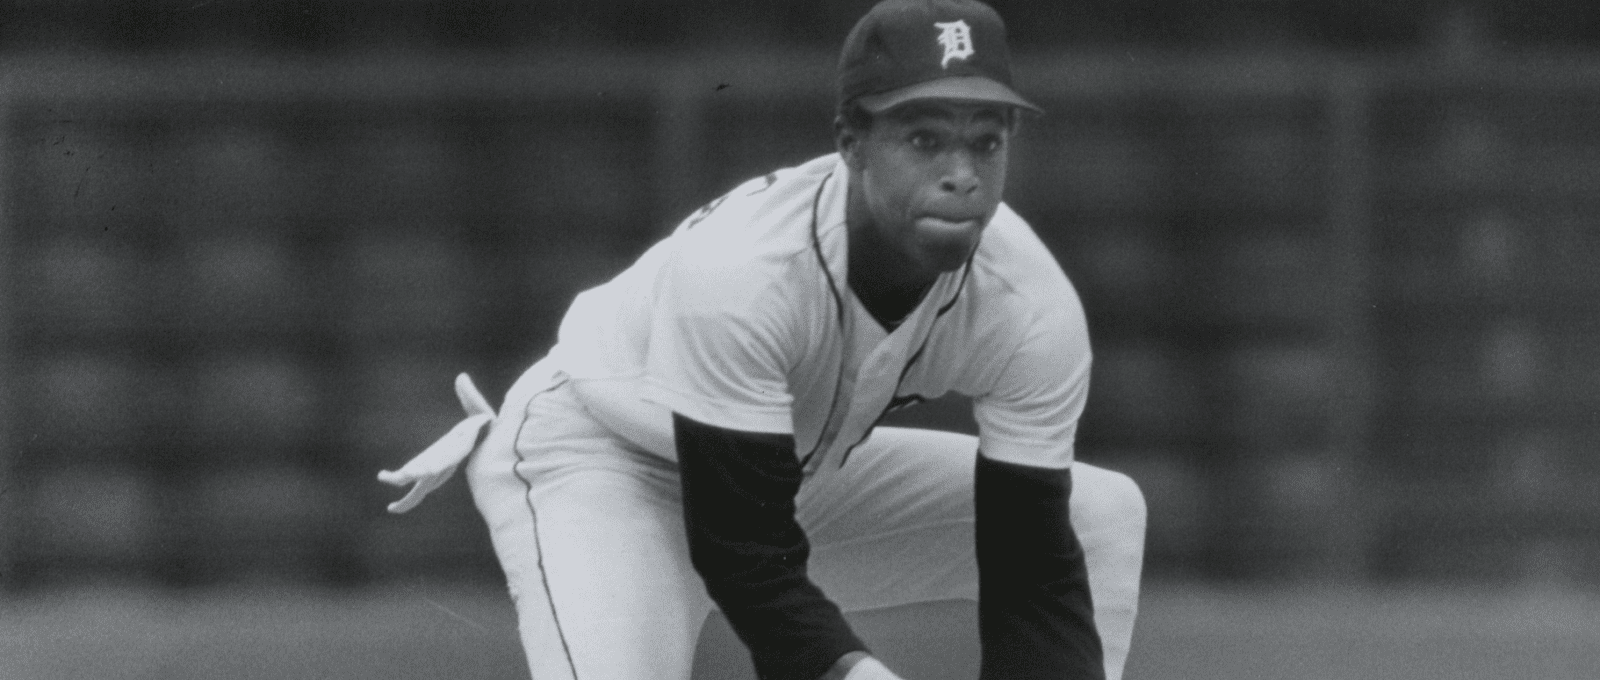 Detroit Tigers: Lou Whitaker will have his No. 1 retired this summer